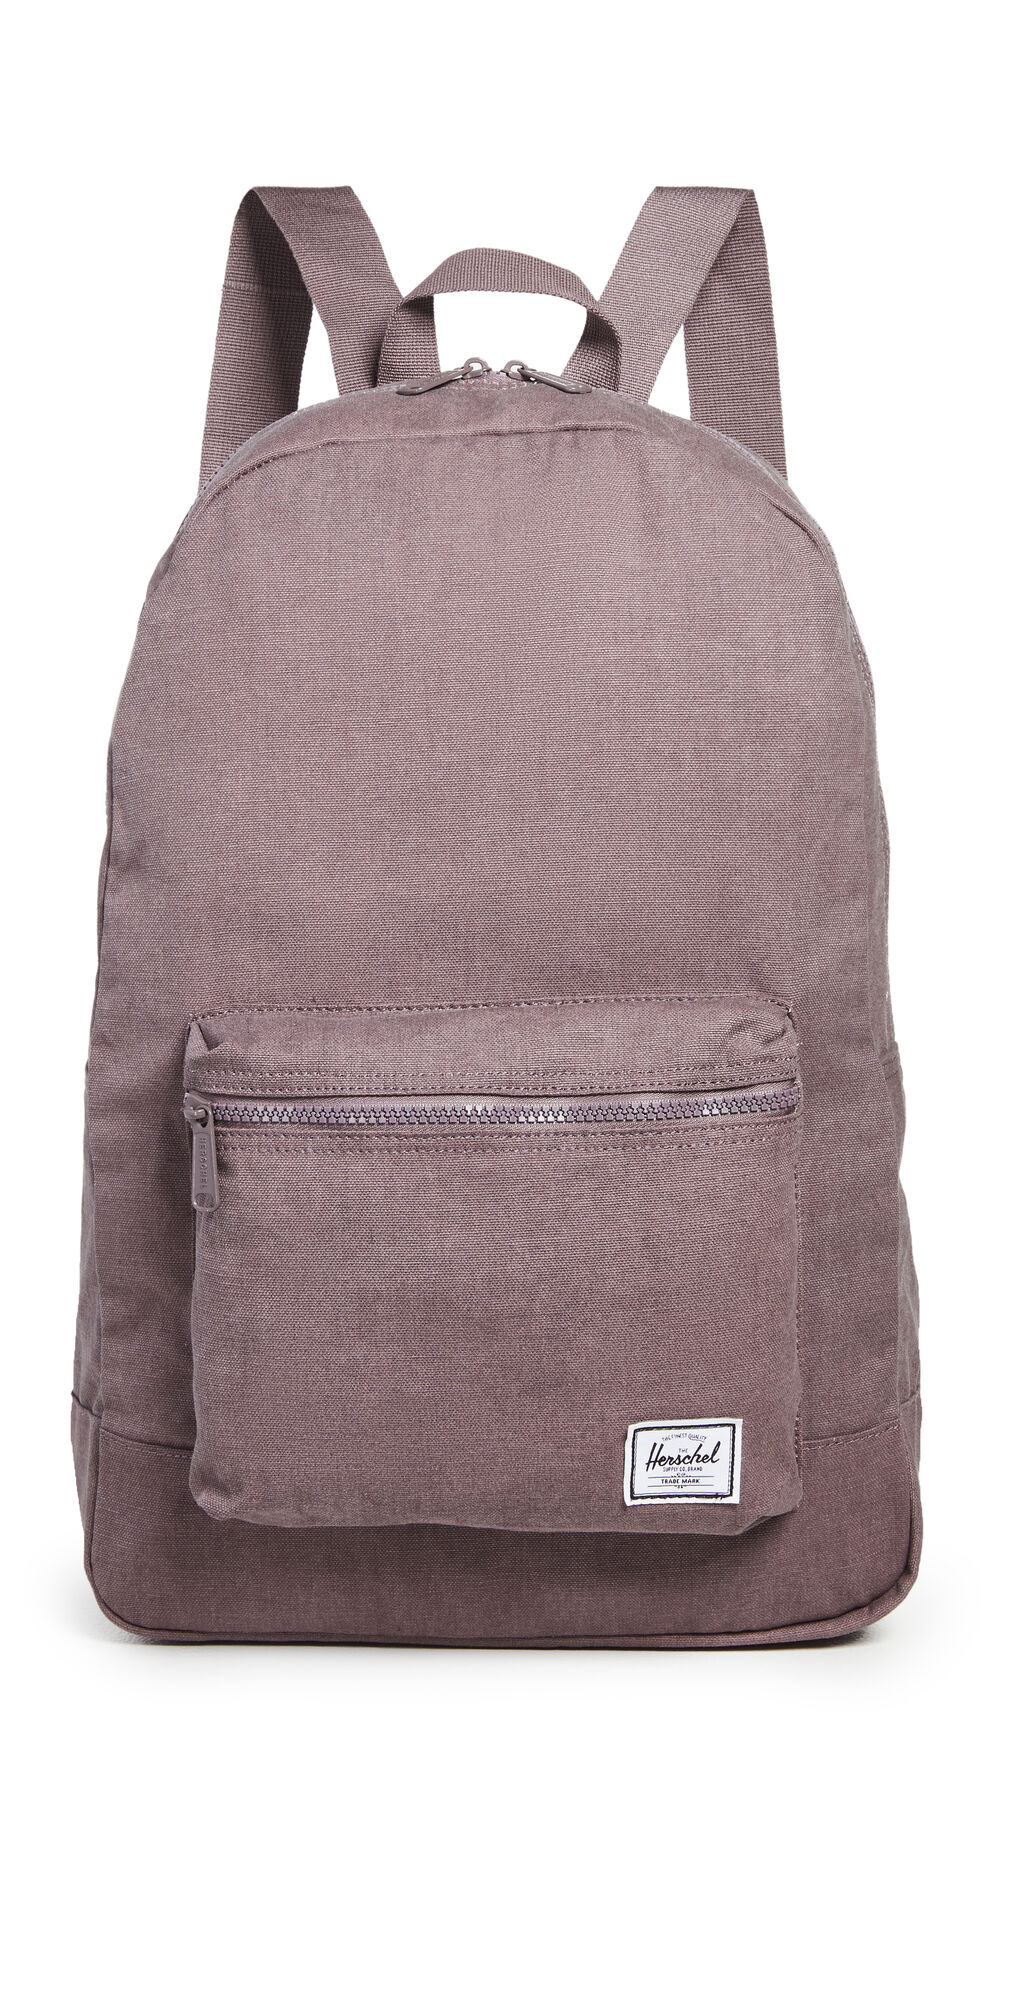 Herschel Supply Co. Packable Daypack Sparrow One Size  Sparrow  size:One Size